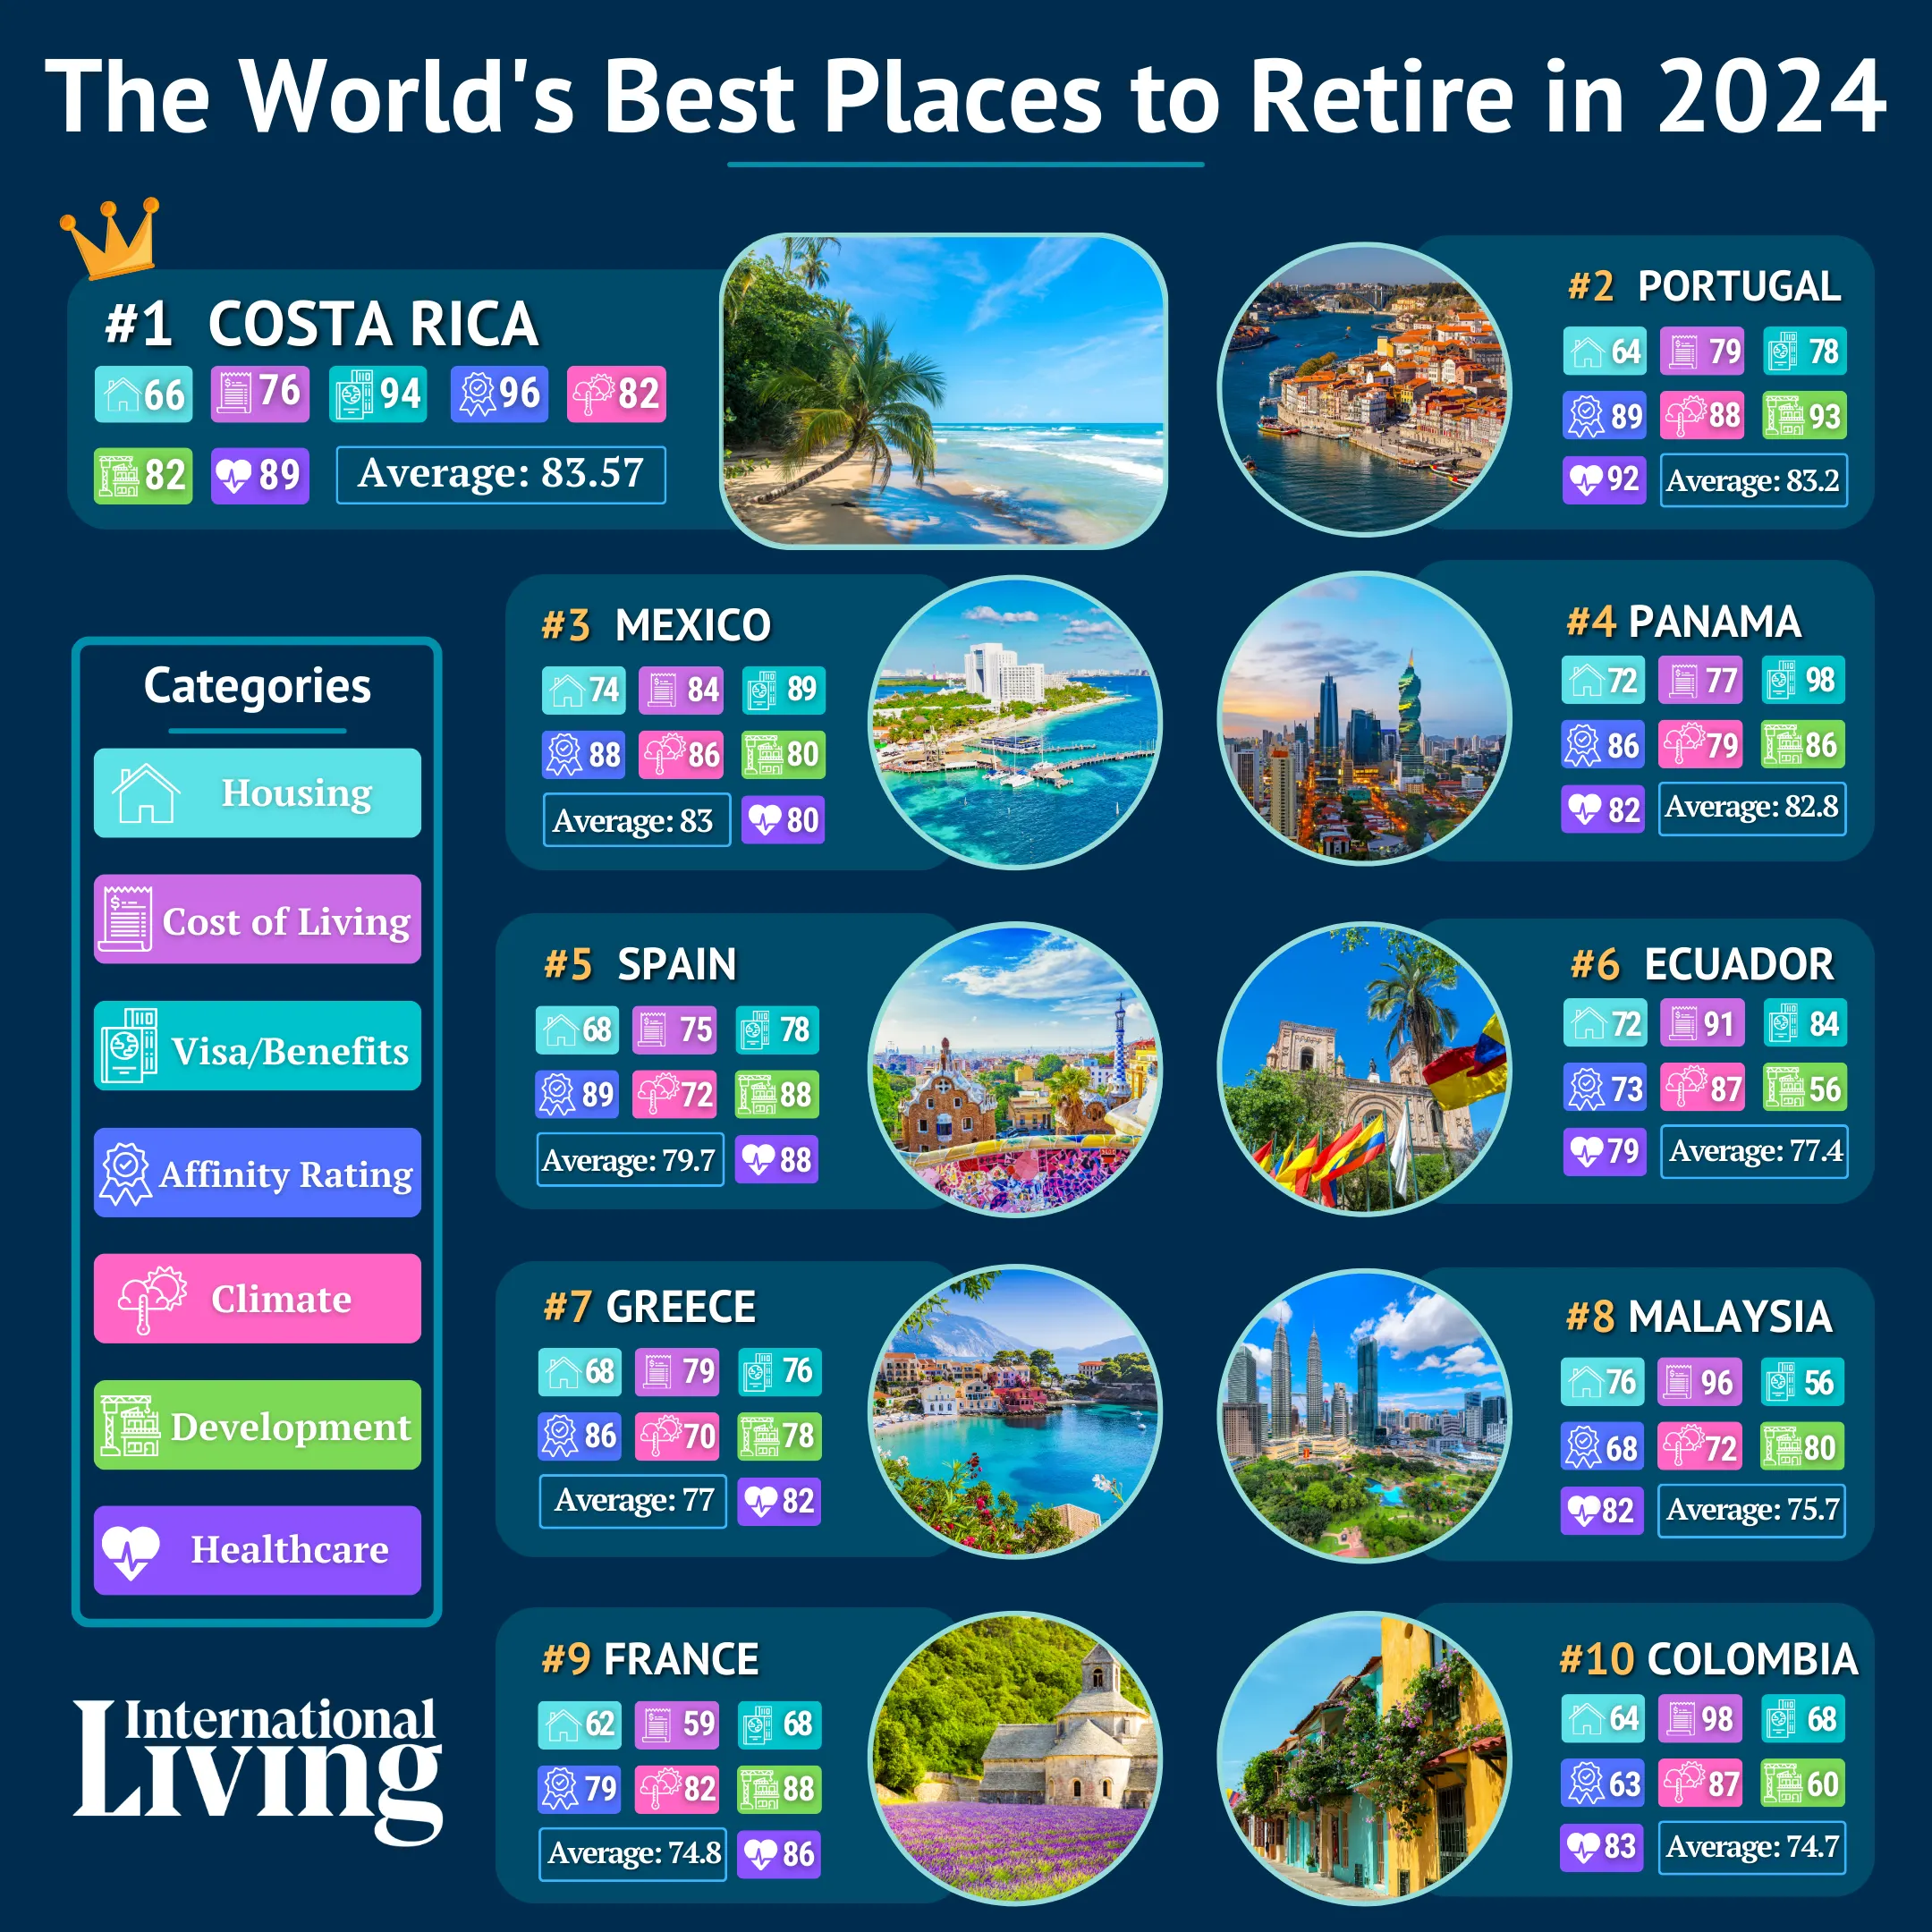 The World's Best Places to Retire in 2024